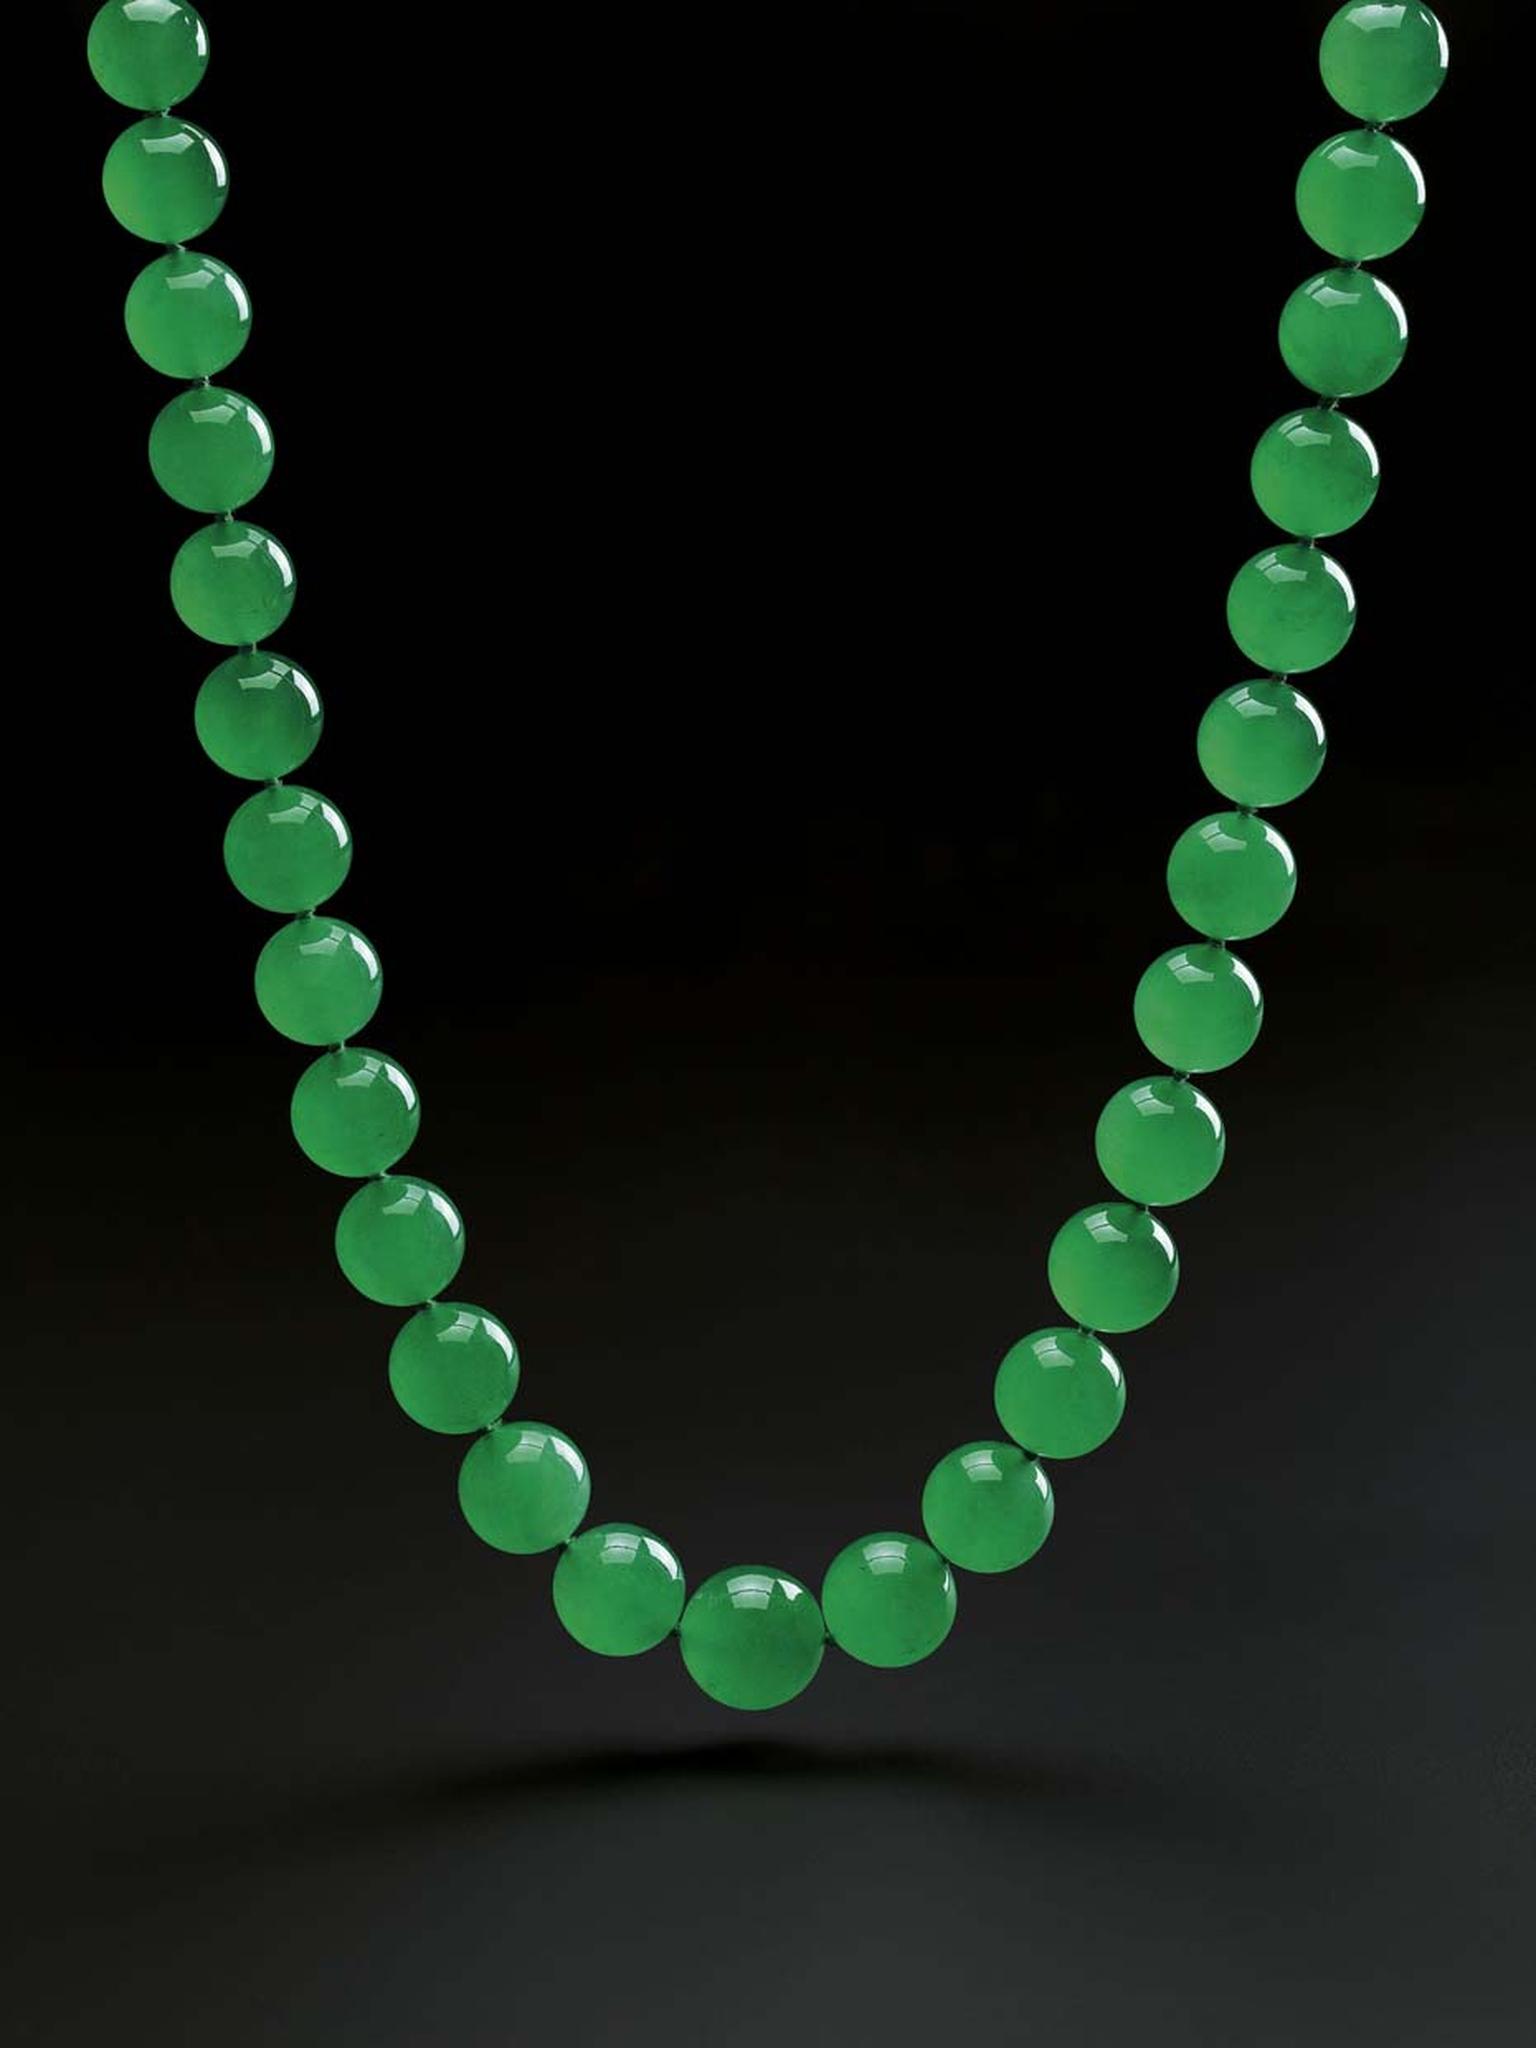 The Hutton-Mdivani nehe Hutton-Mdivani necklace, estimated to sell for upwards of US$12.8 million, sold for a record-breaking US$27.44 million at Sotheby's Hong Kong on 6 April 2014